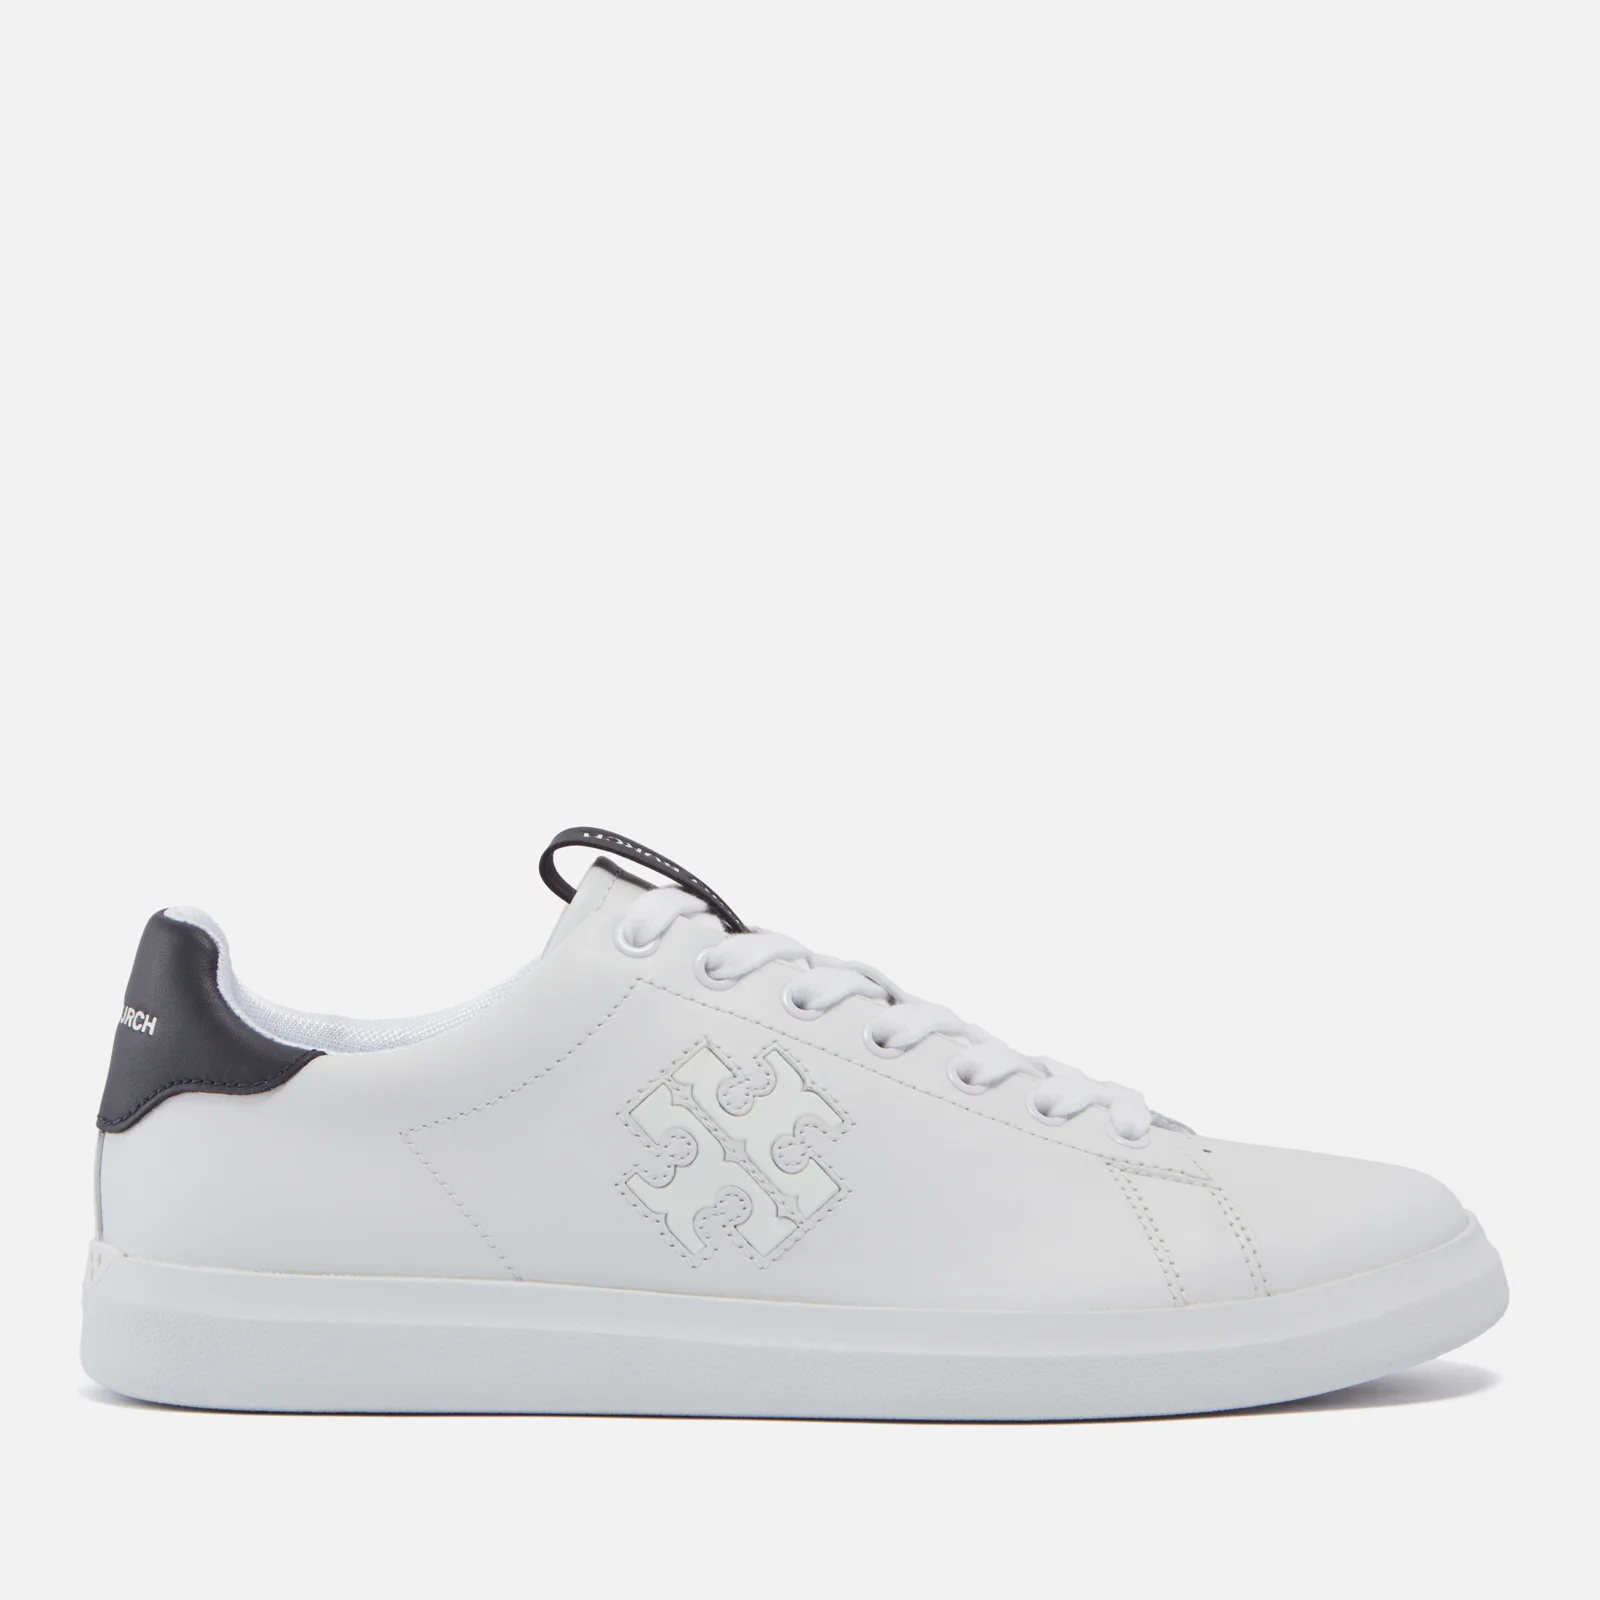 Tory Burch Women's Howell Leather Trainers Image 1